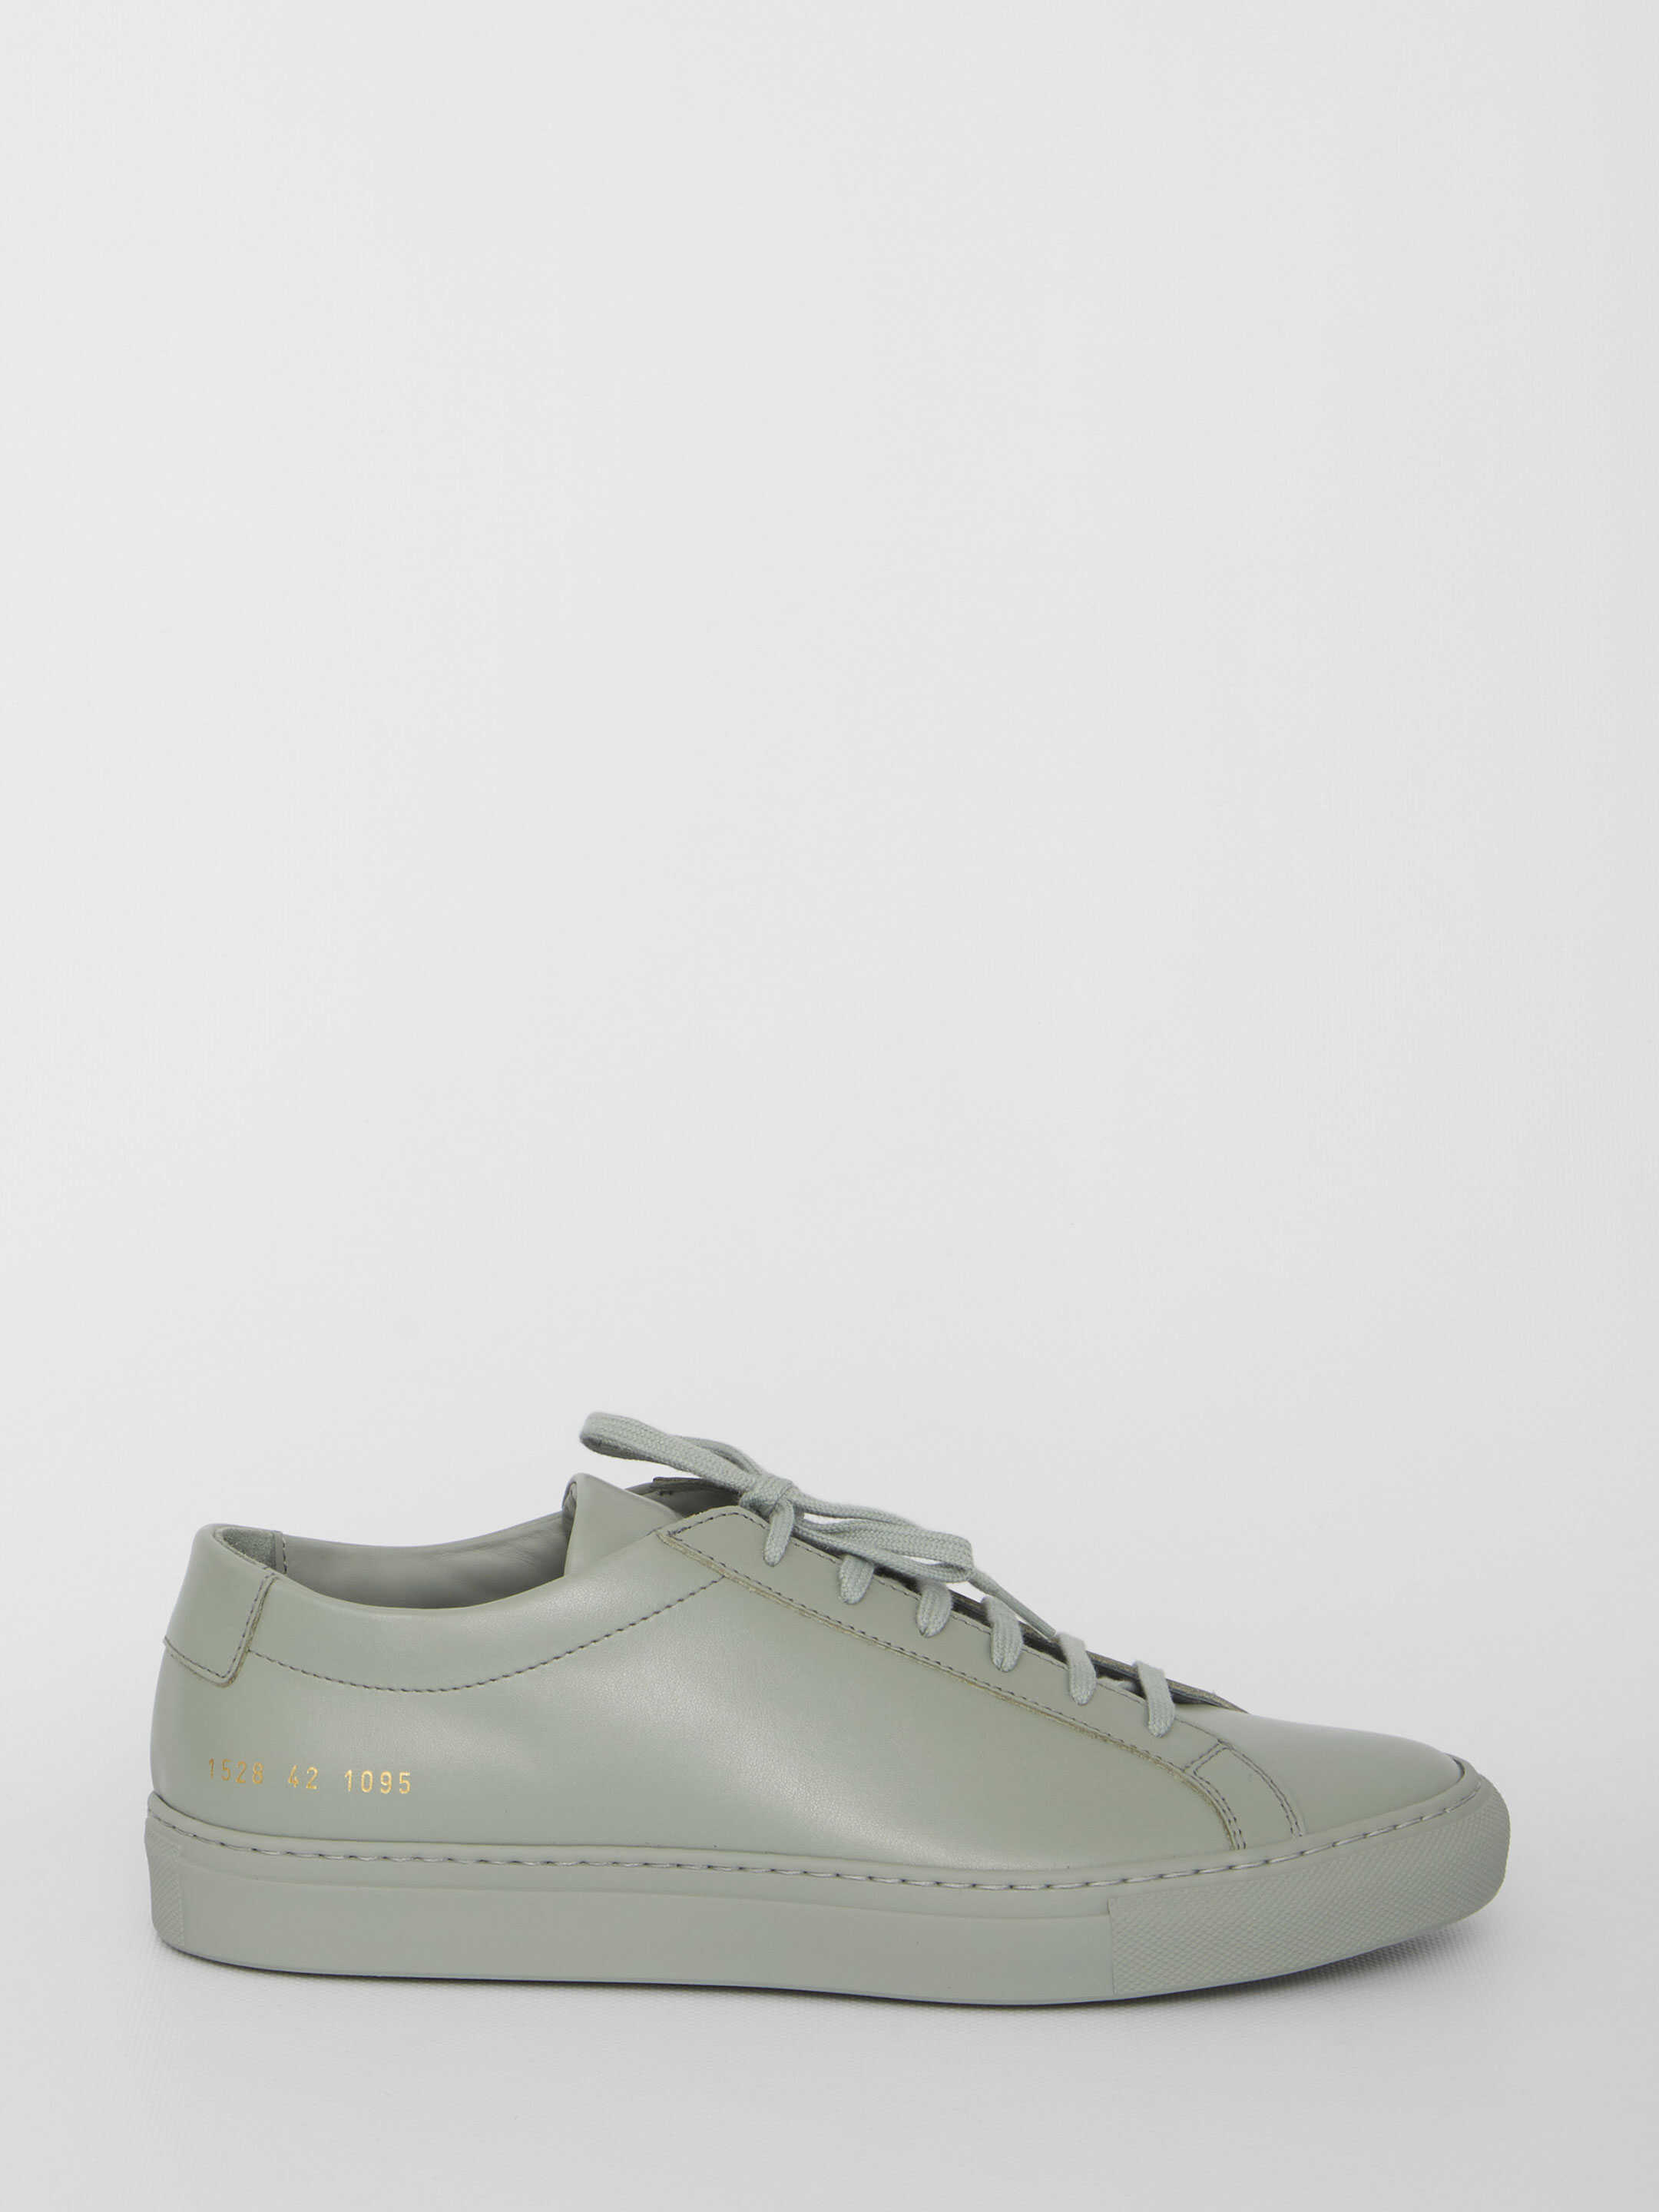 Common Projects Original Achilles Low Sneakers Green